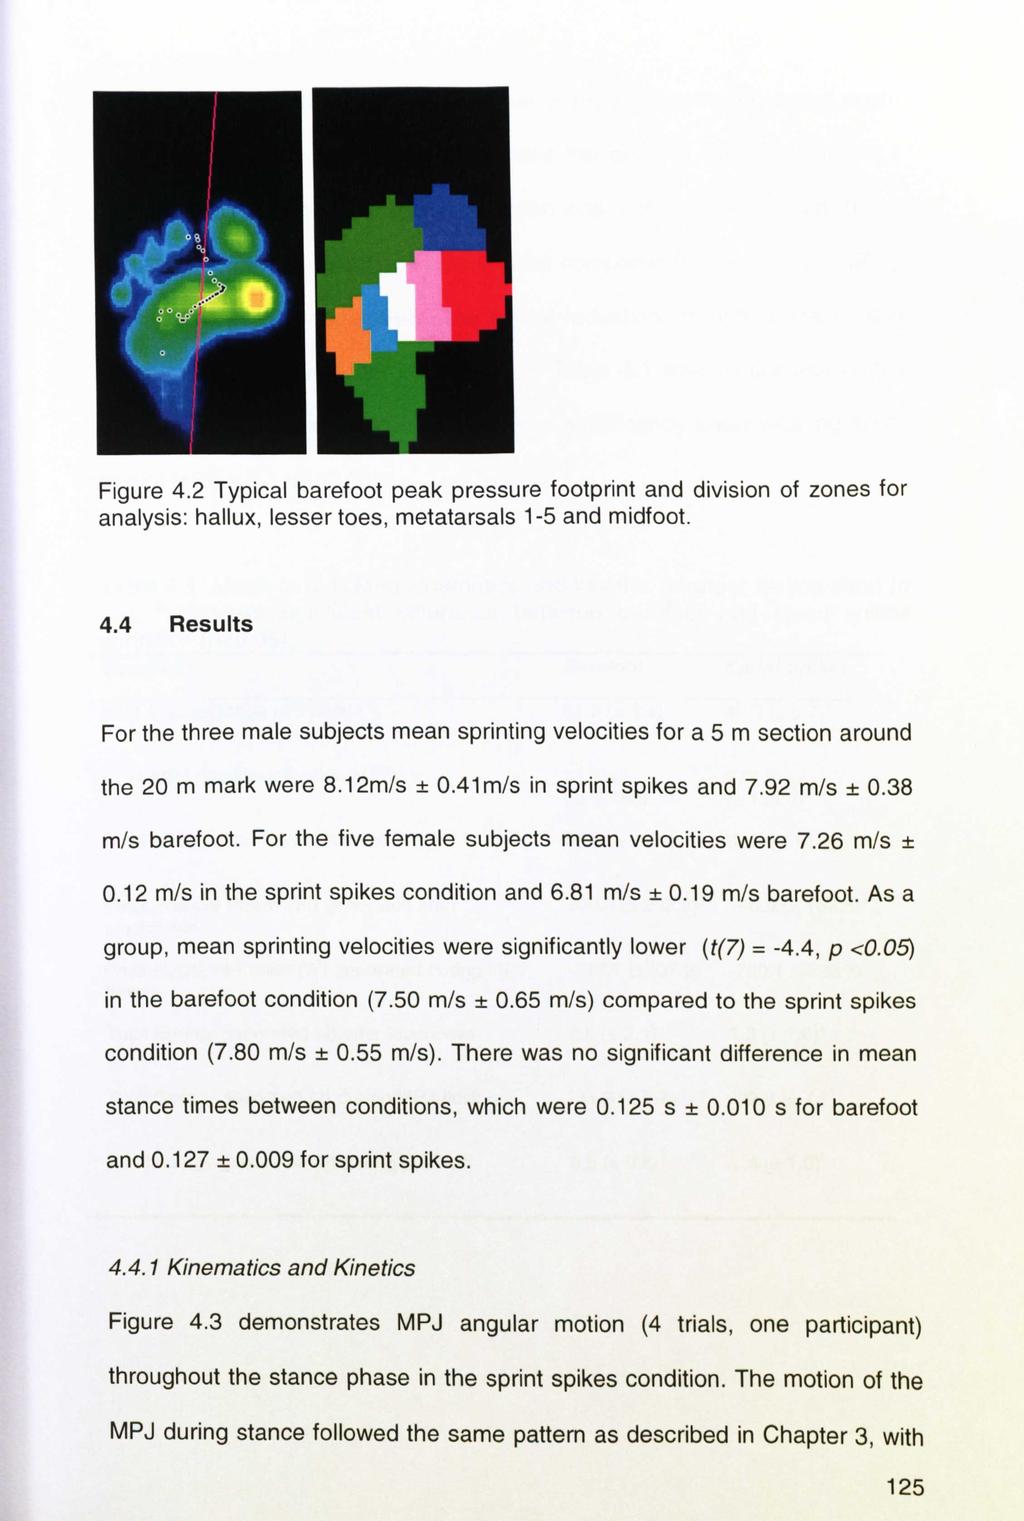 Figure 4.2 Typical barefoot peak pressure footprint and division of zones for analysis: hallux, lesser toes, metatarsals 1-5 and midfoot. 4.4 Results For the three male subjects mean sprinting velocities for a 5 m section around the 20 m mark were 8.